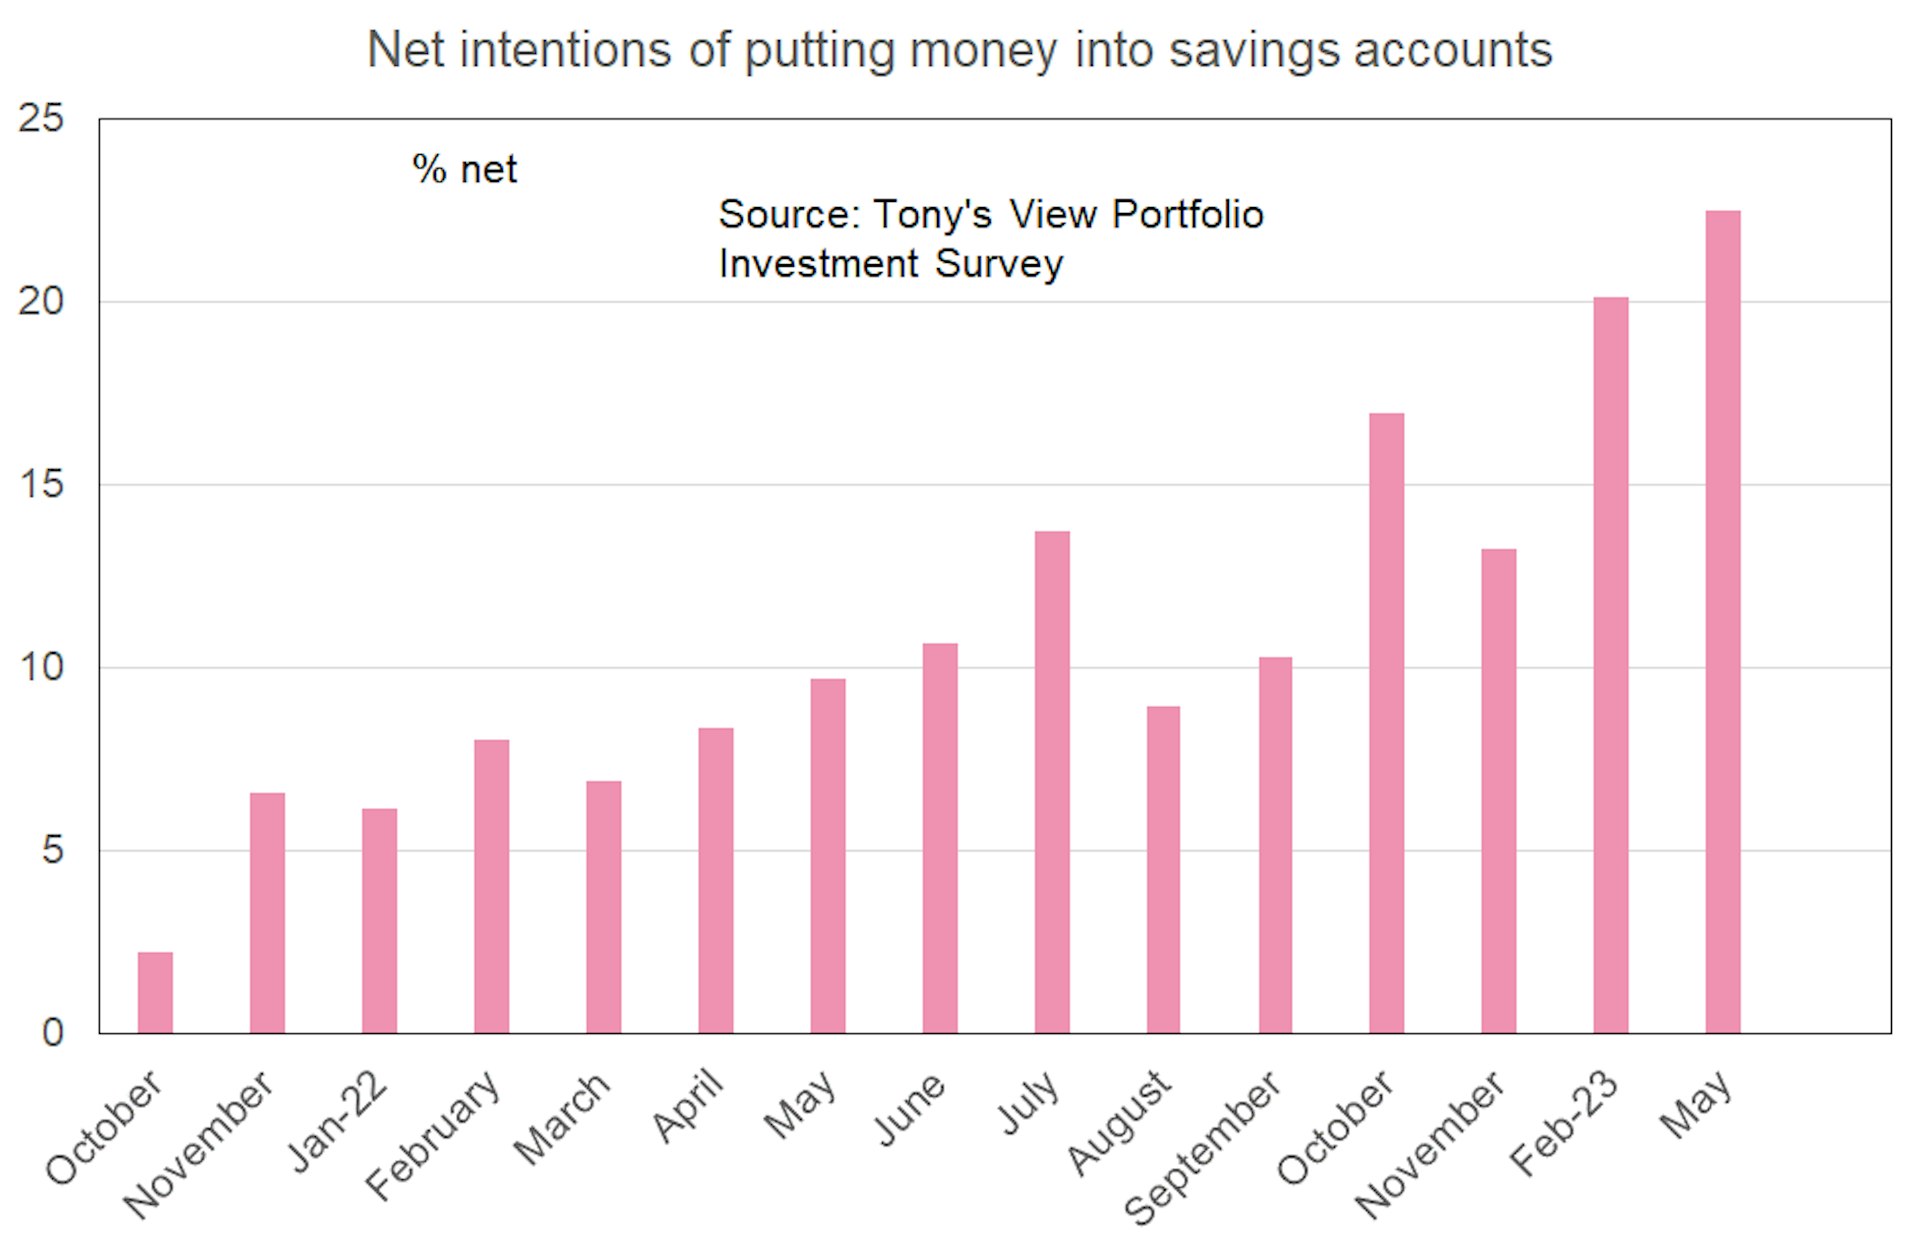 Bar graph showing investors' intention of putting money into a savings account. Intentions grew from 20% in Feb to 23% in May. 